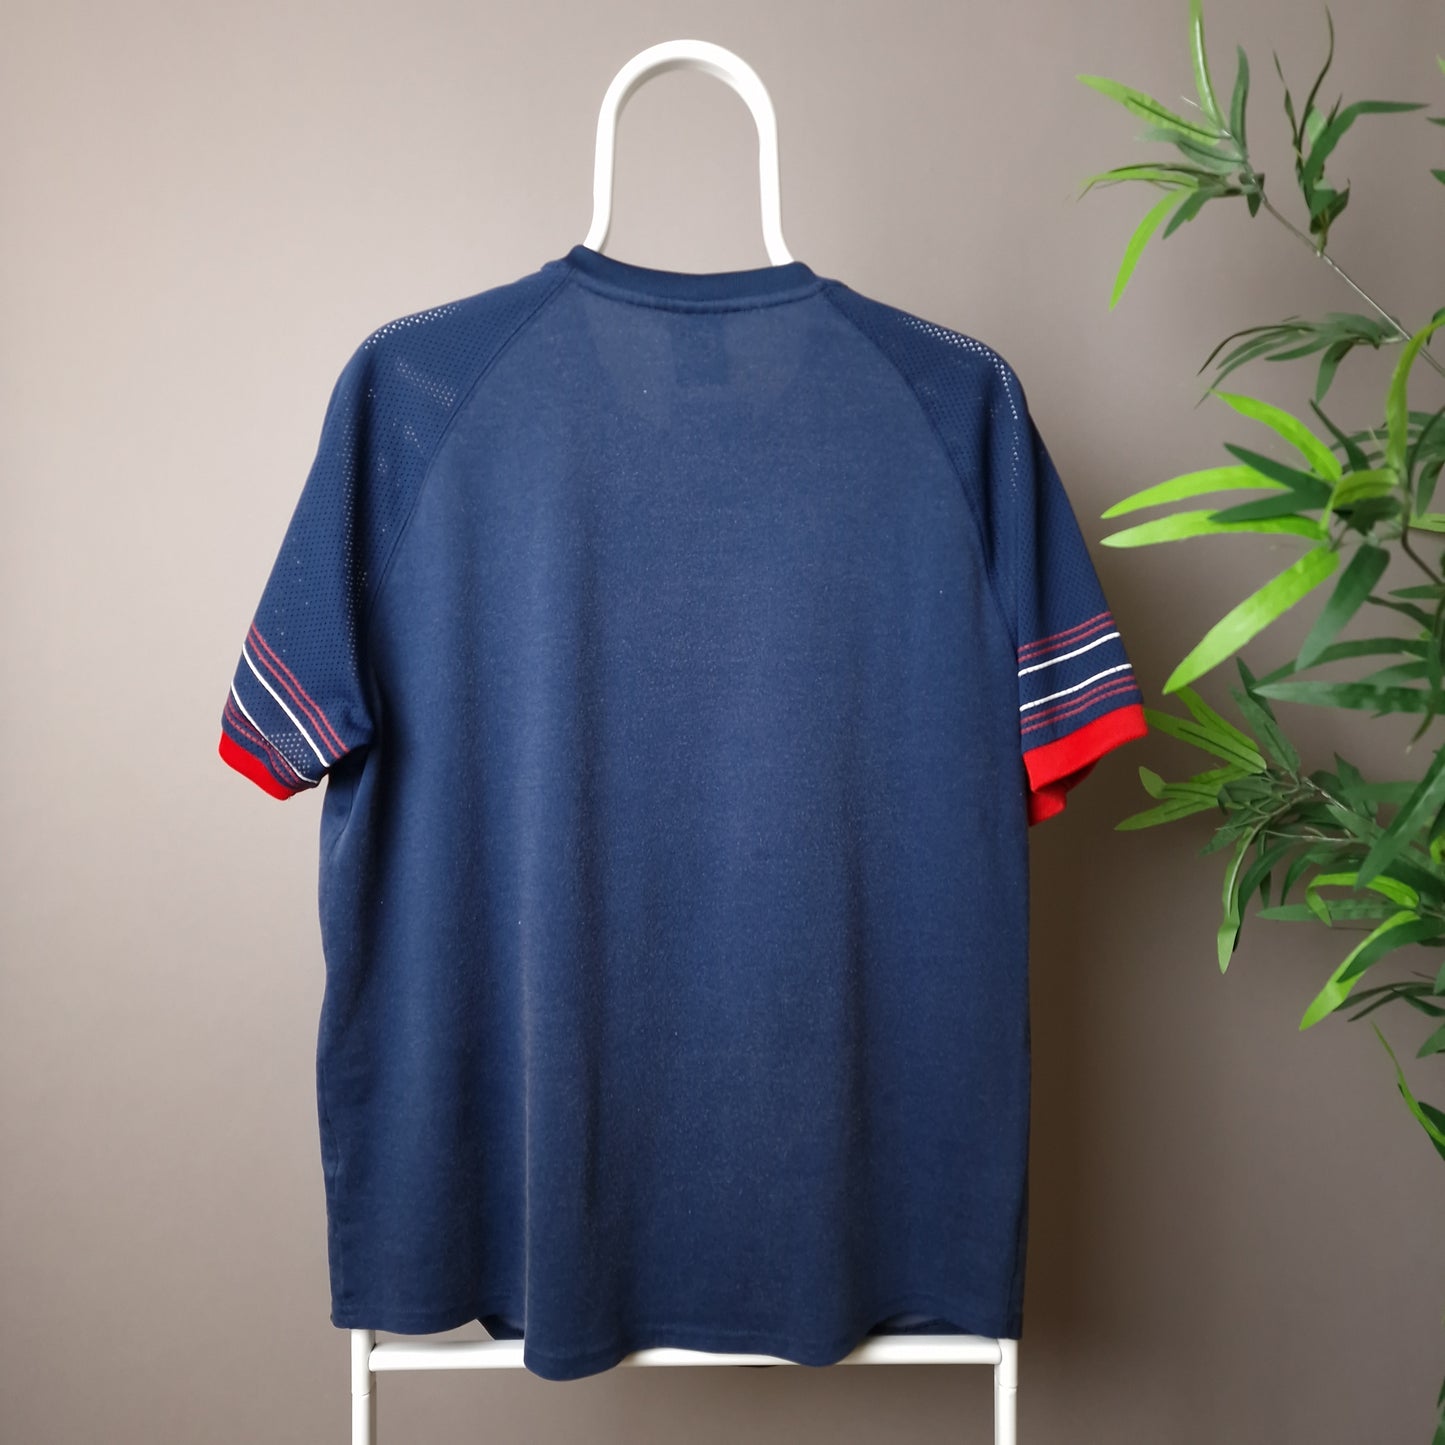 Vintage Nike t-shirt in blue and red - medium